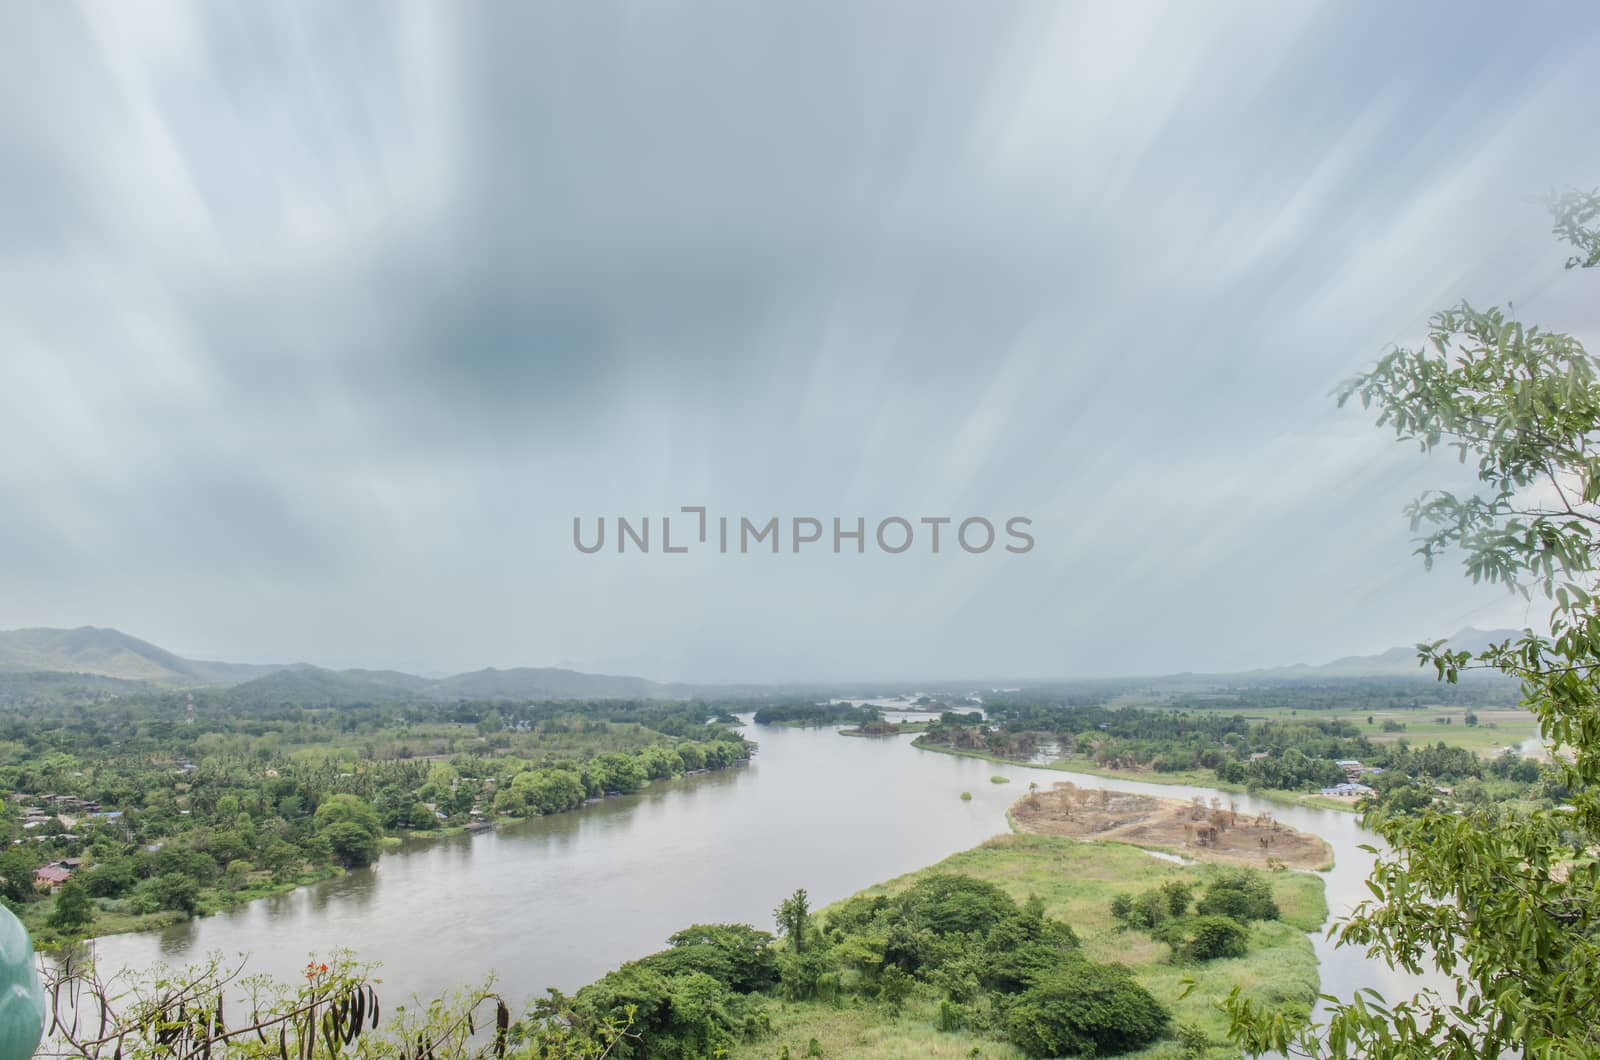 Landscape from the Hill Beside River with Moving Cloud and Green Trees.